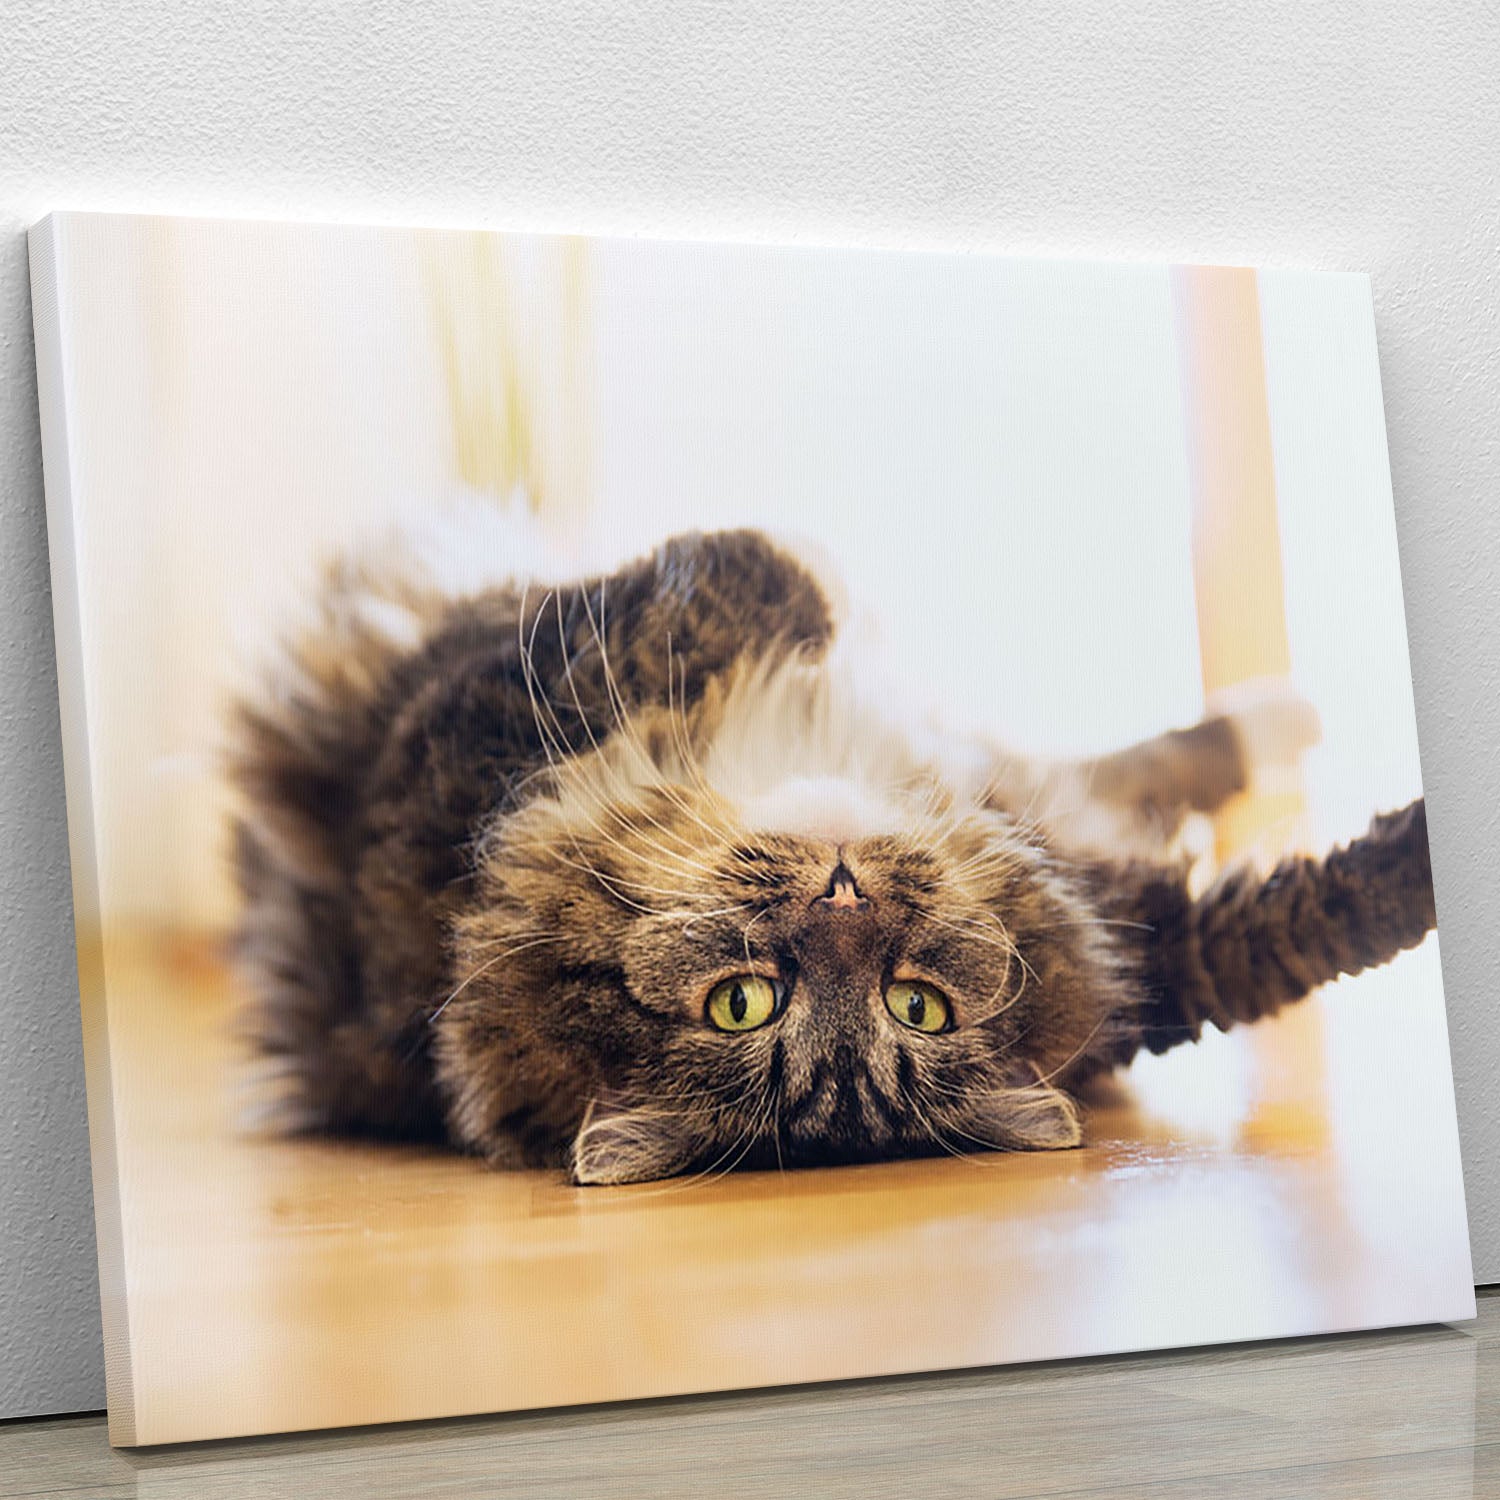 Funny cat is lying relaxed on his back Canvas Print or Poster - Canvas Art Rocks - 1